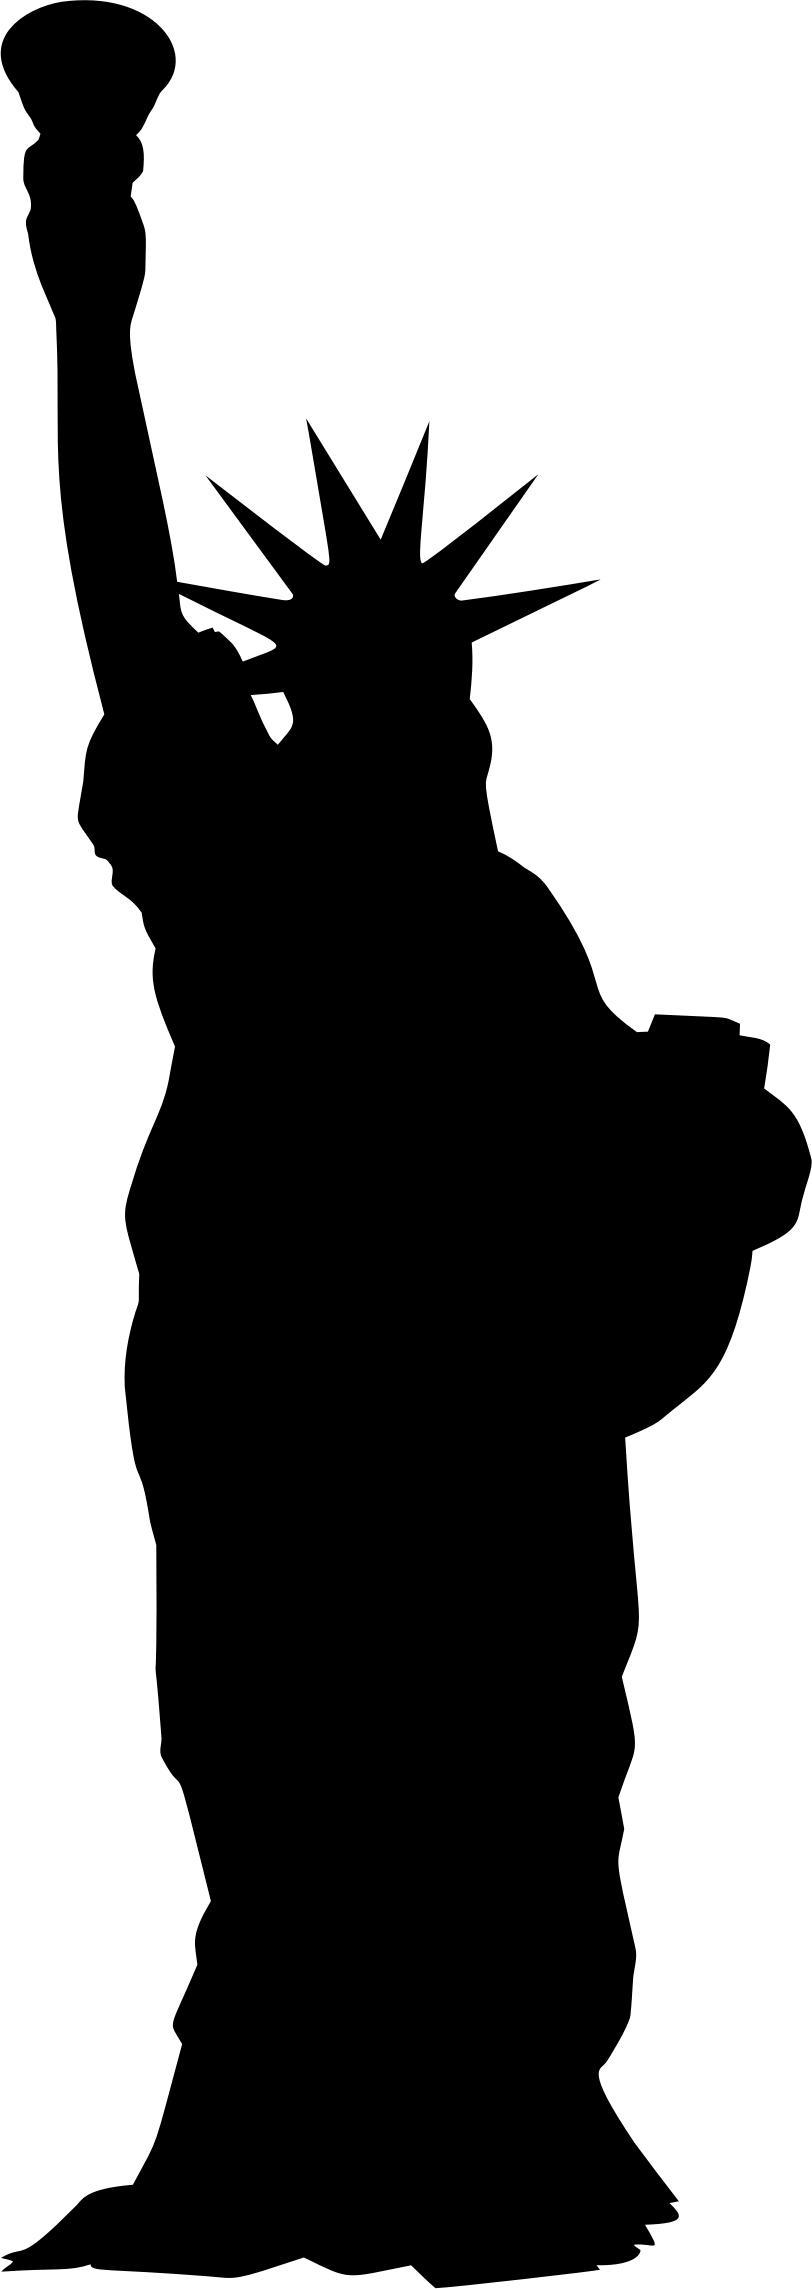 Statue Of Liberty Type 2 Silhouette png transparent